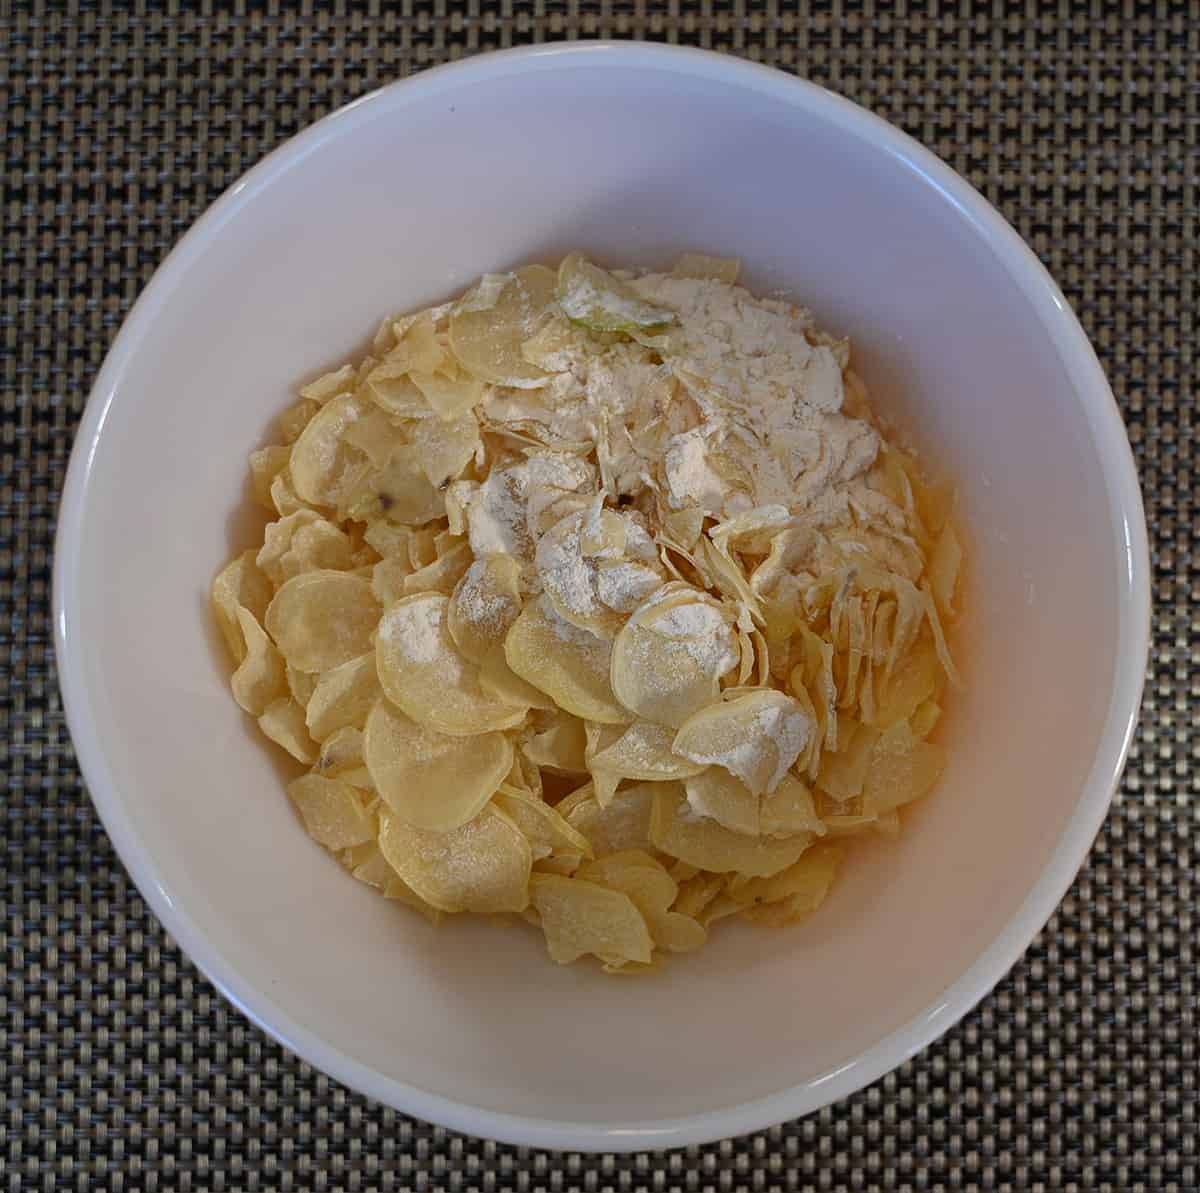 Top down image of a bowl containing the dehydrated potatoes from the Johnny's potatoes au gratin.